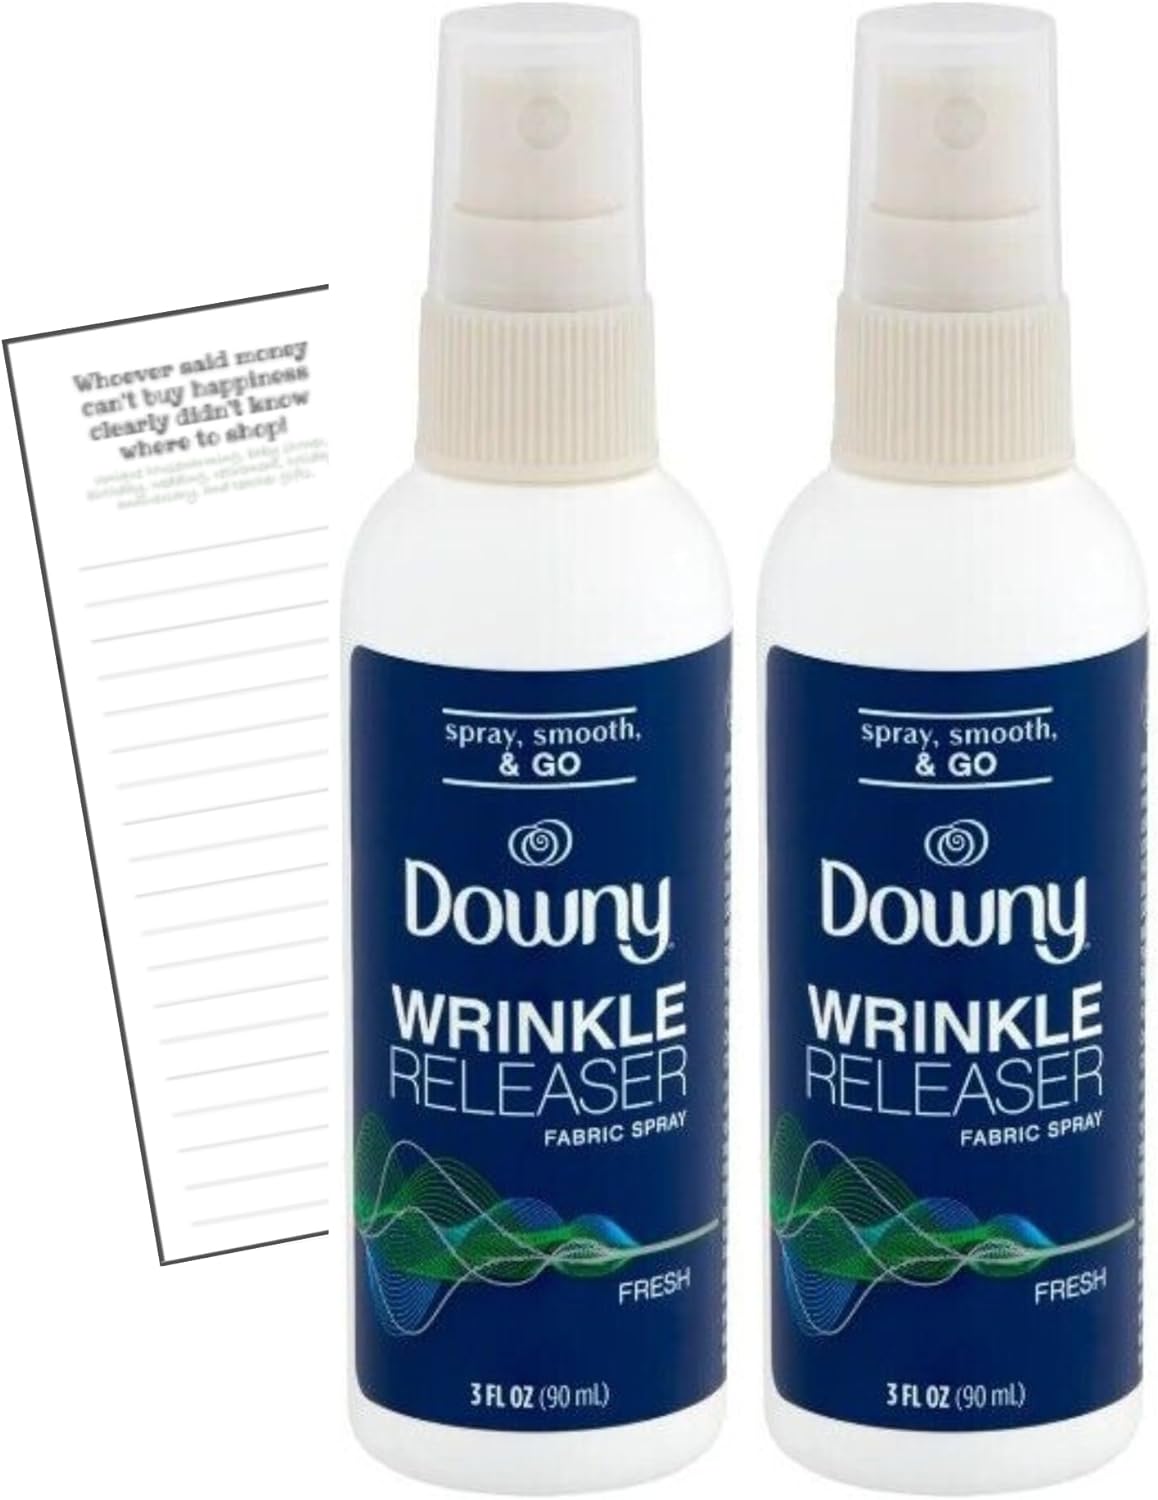 Bundle of Downy Wrinkle Releaser, 3oz Travel Size, Light Fresh Scent (2 Pack-Packaging May Vary) by Downy with Convenient Magnetic Shopping List by Harper & Ivy Designs : Health & Household